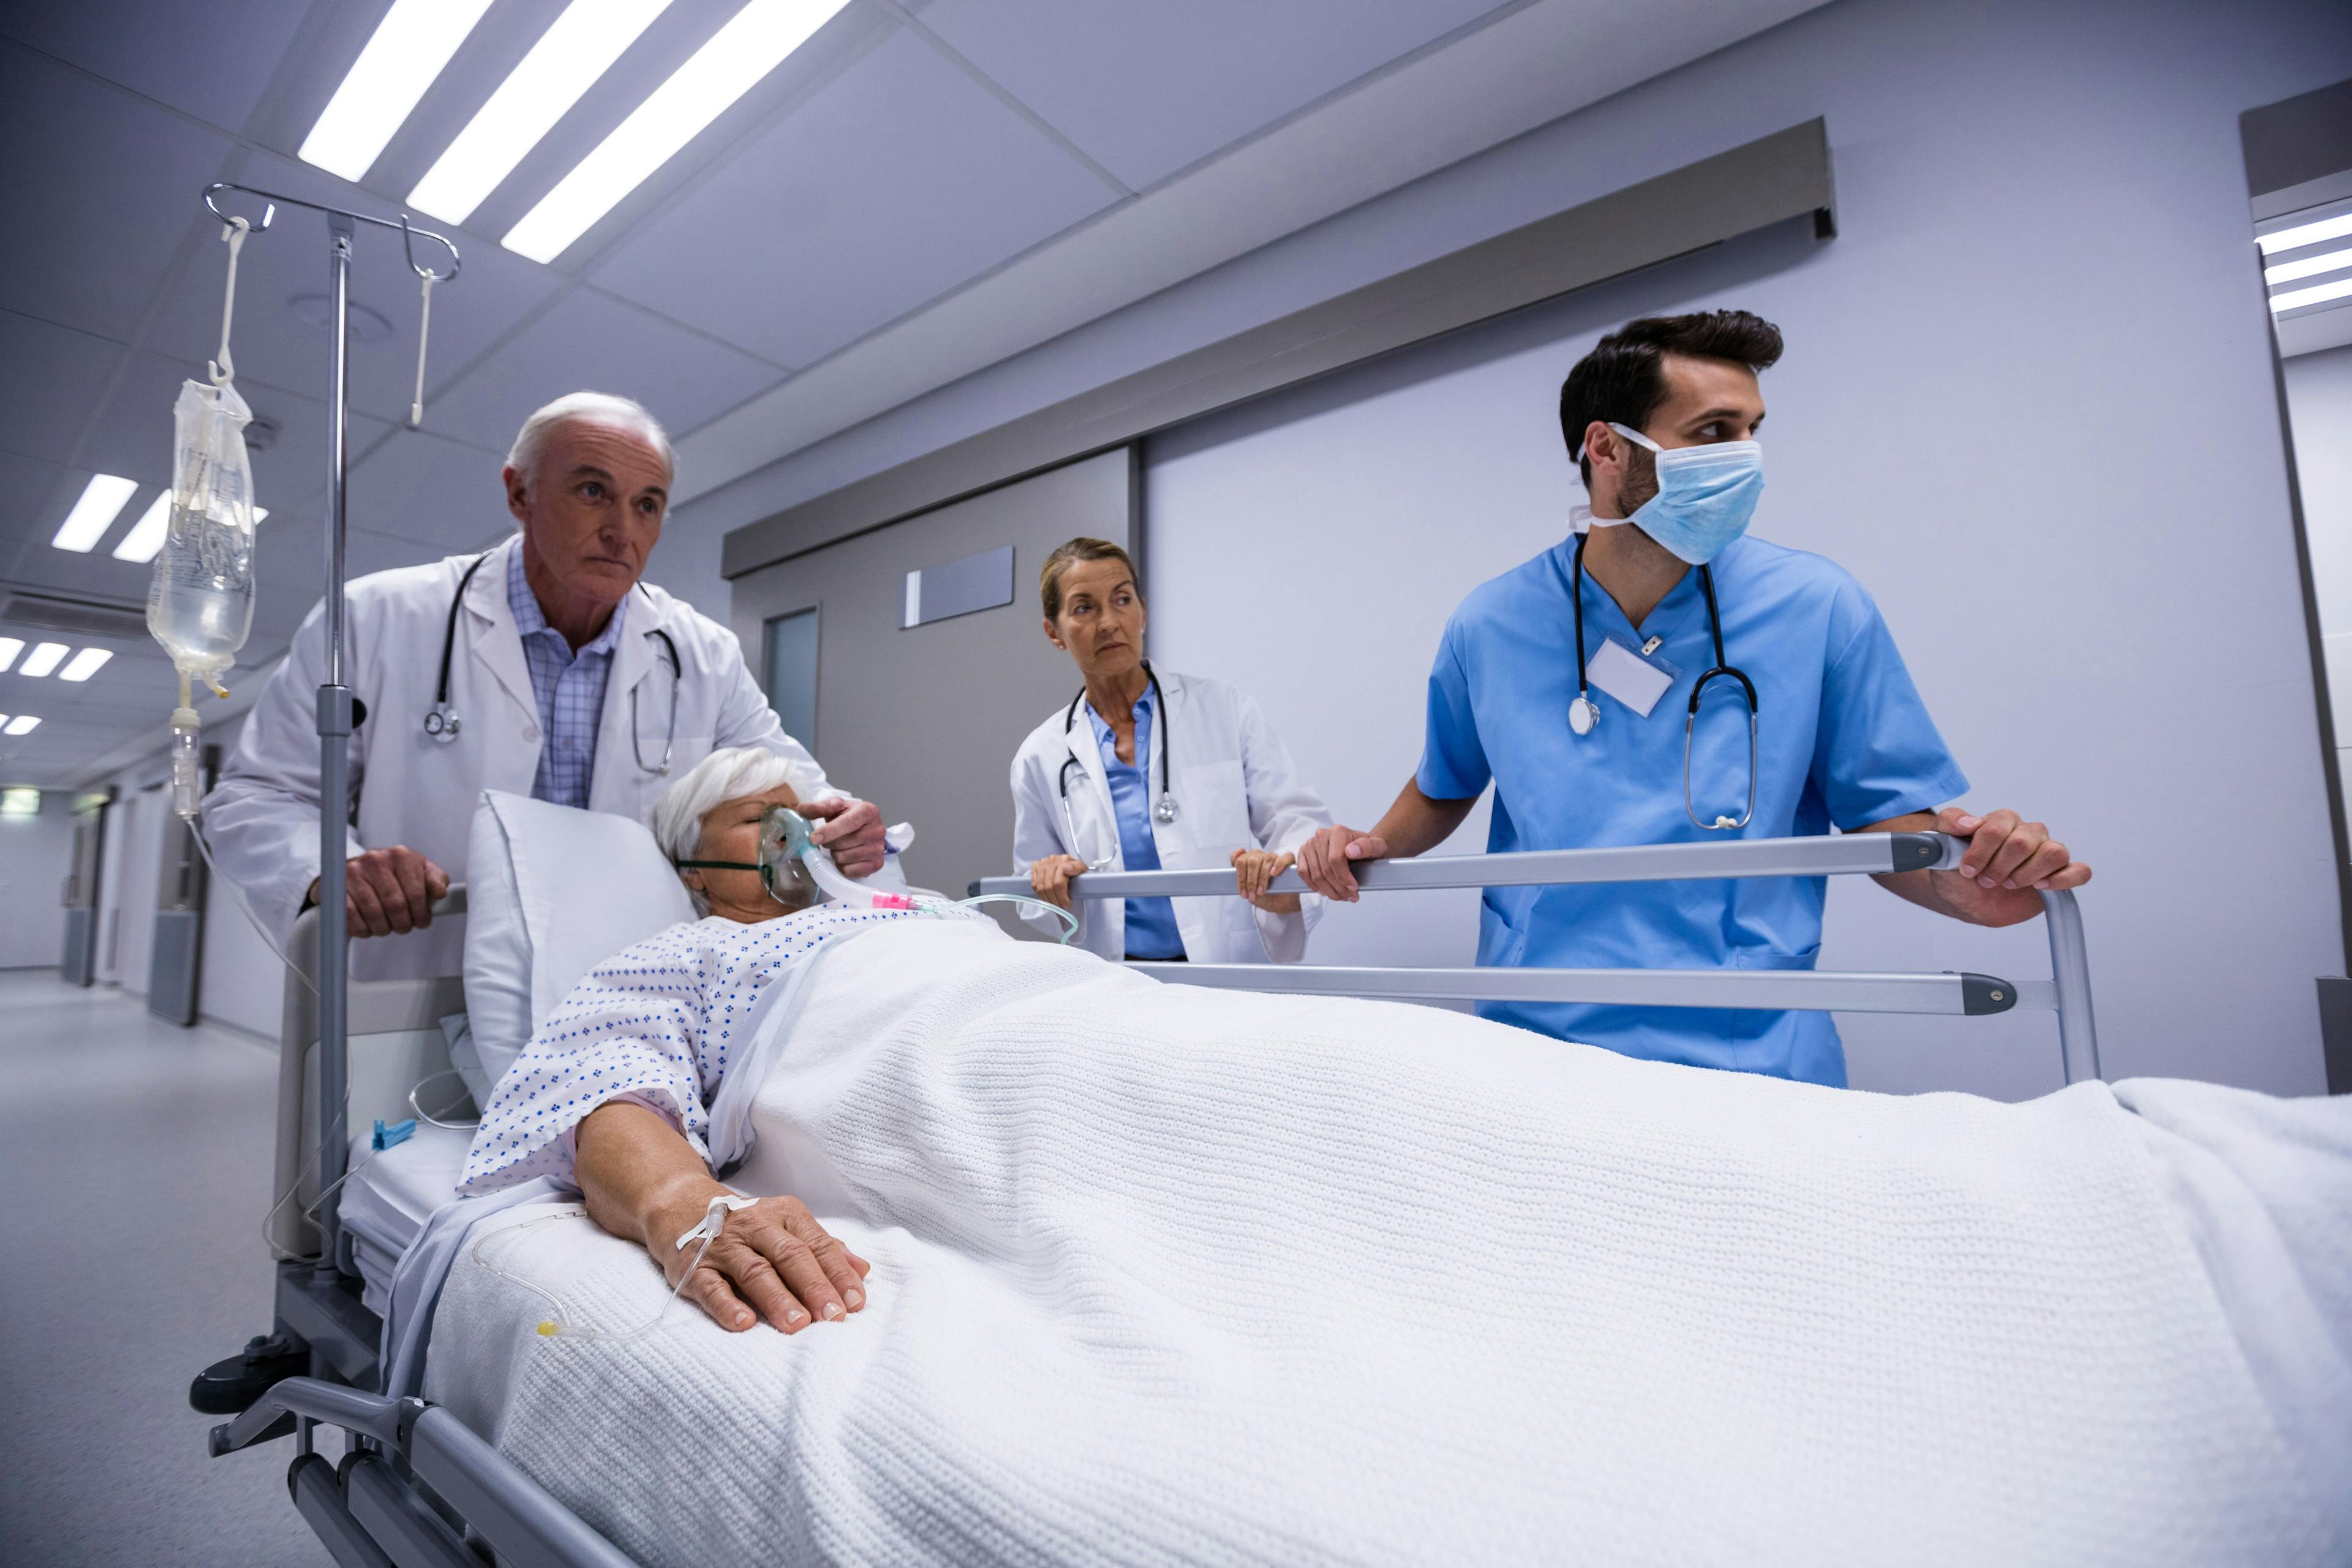 Hospitals improved patient safety in past decade, but much work remains, Leapfrog Group says